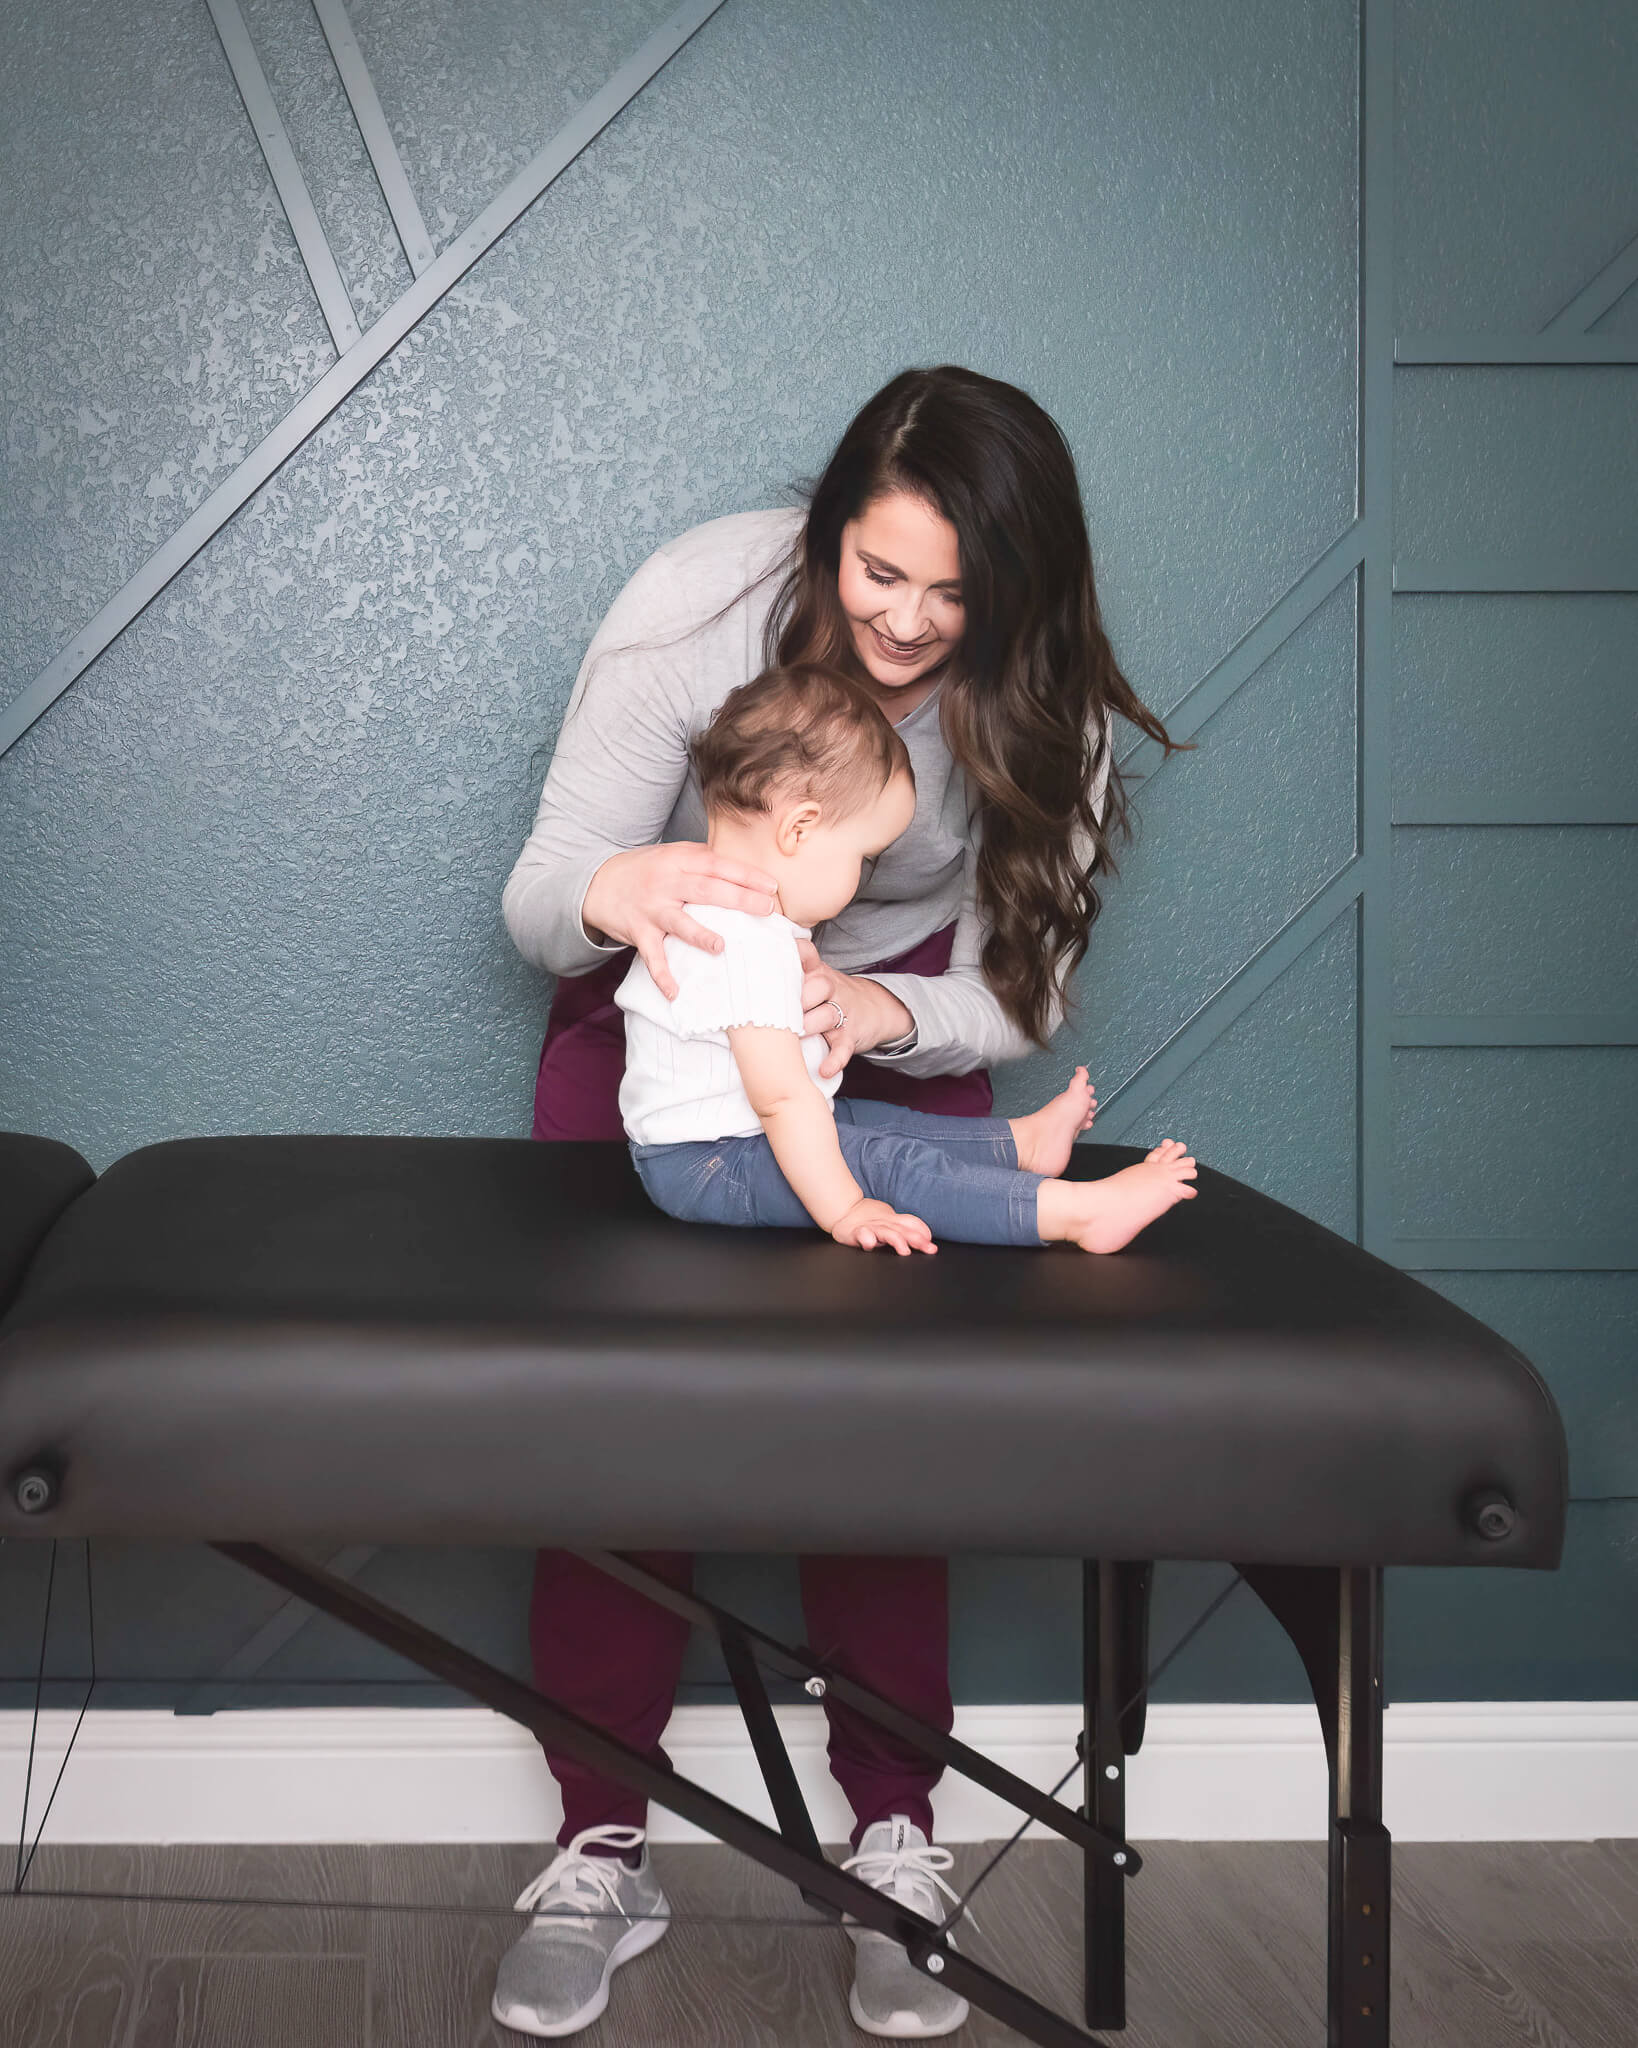 Therapist working with baby in pediatric OT setting captured by Allison Amores Photography